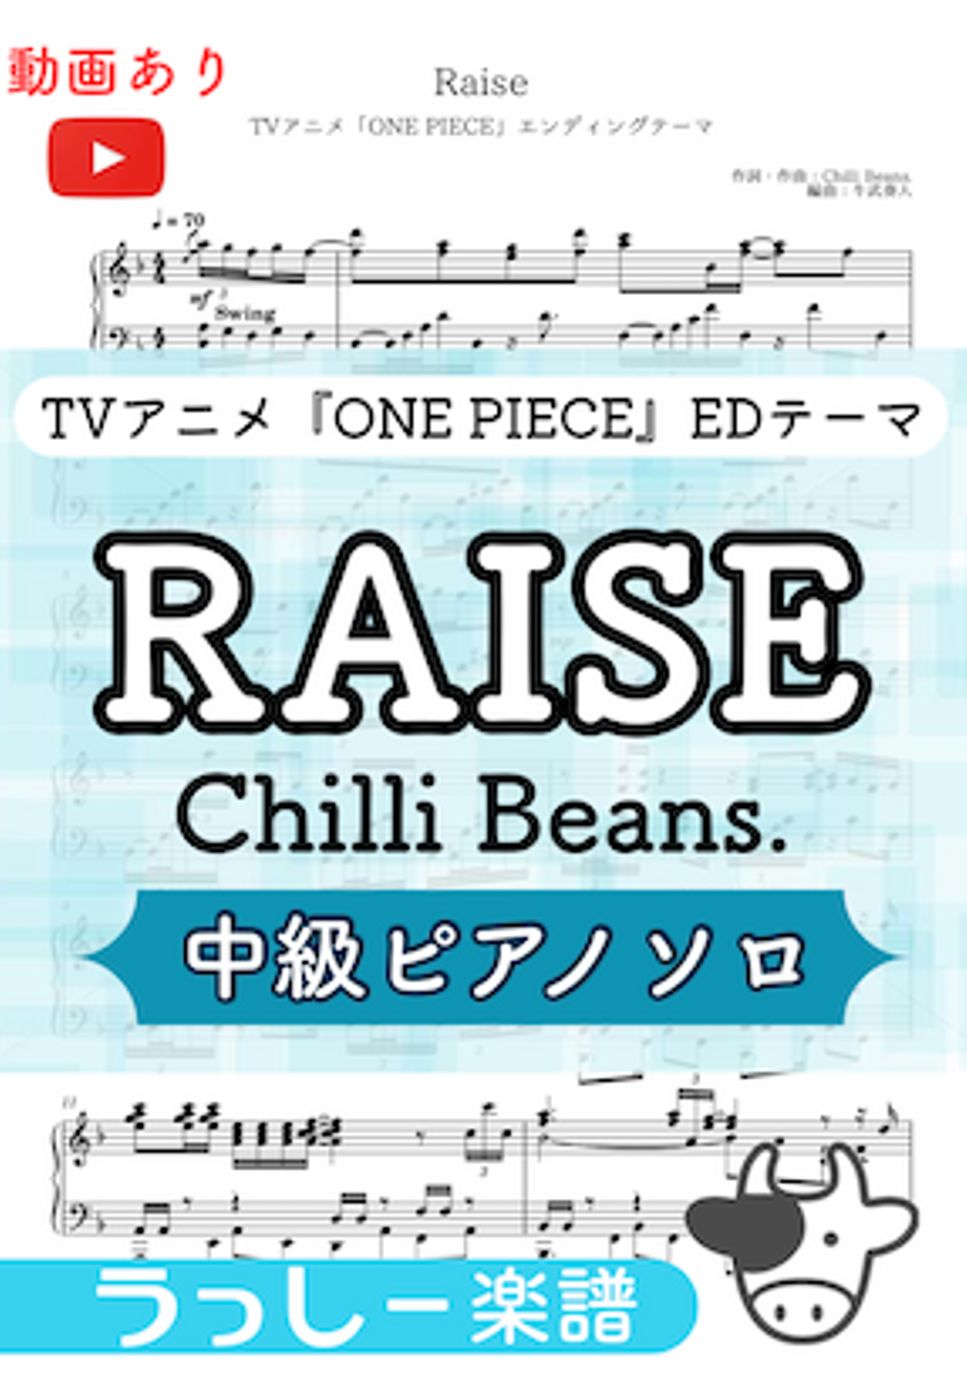 Chilli Beans. - RAISE (TVアニメ『ONE PIECE』EDソング) by 牛武奏人